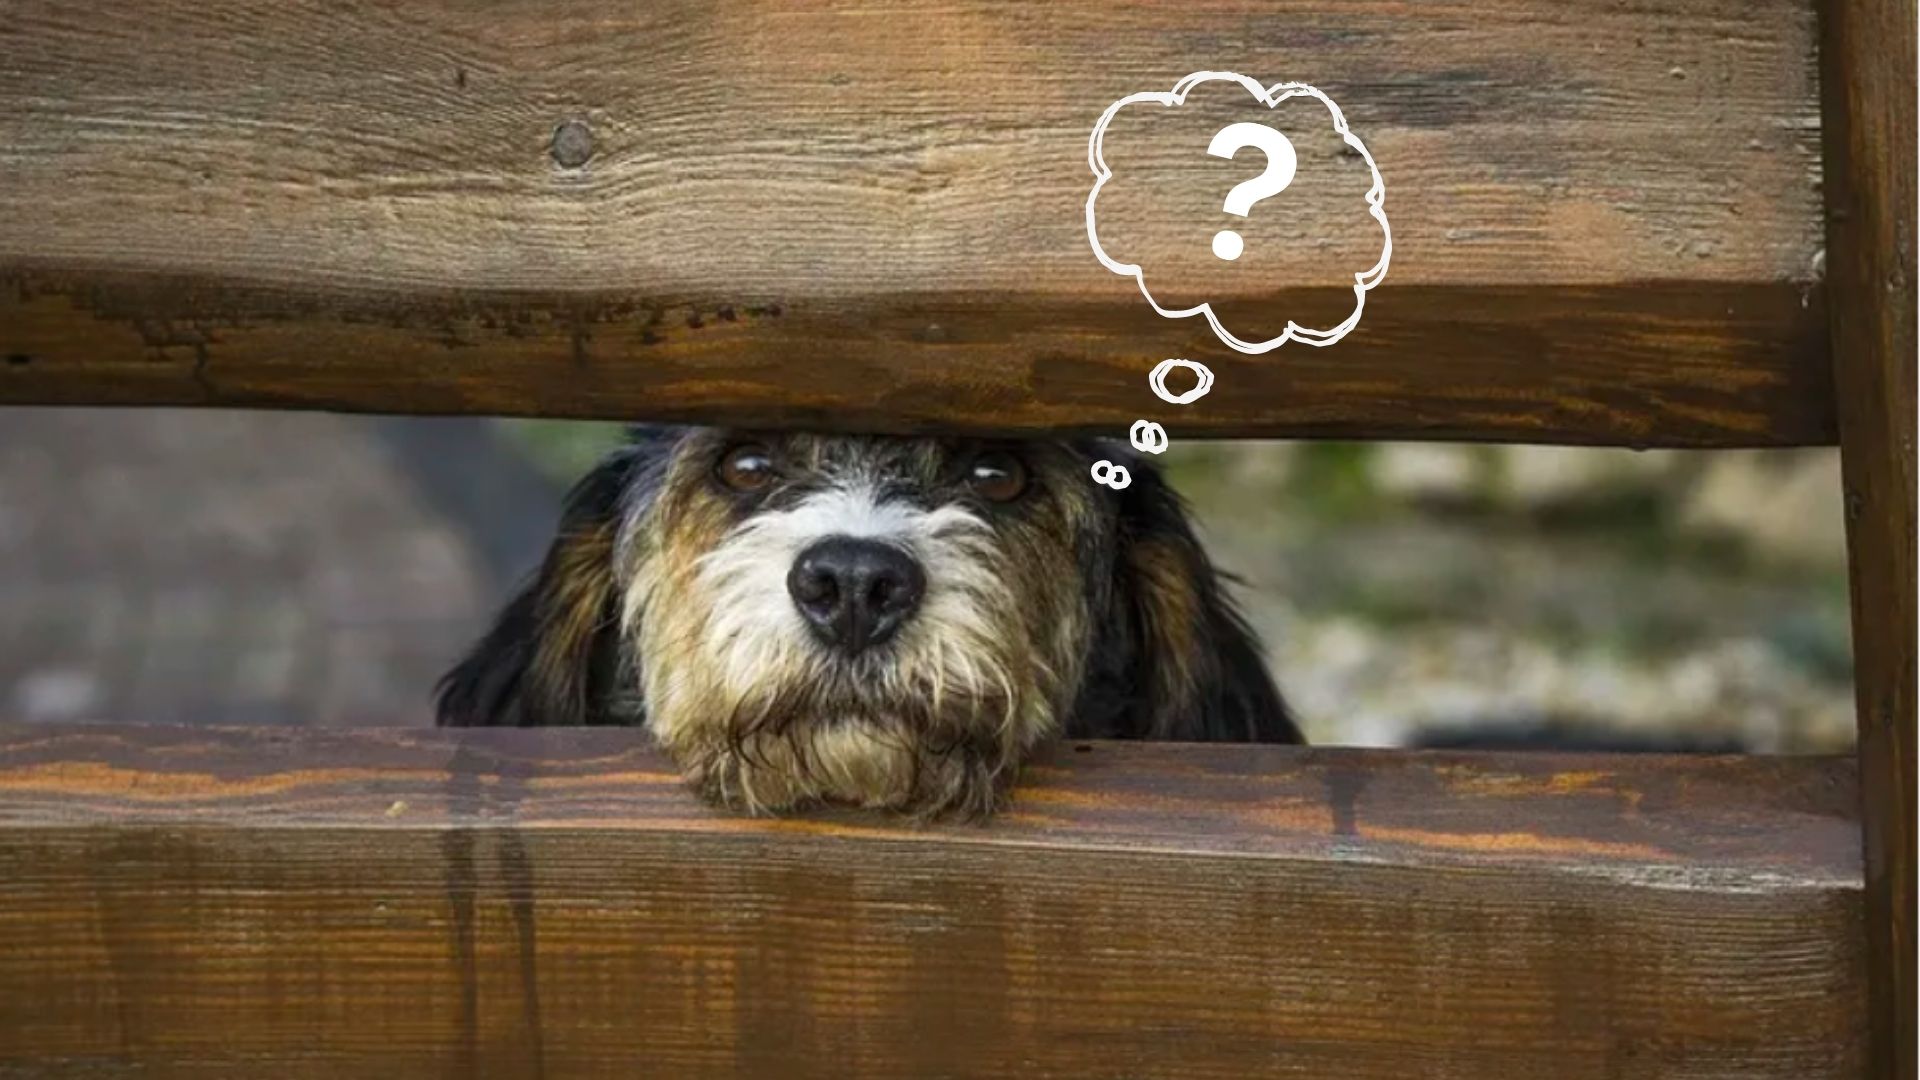 A picture of a dog with a question mark in the thought bubble-nonprofit humour